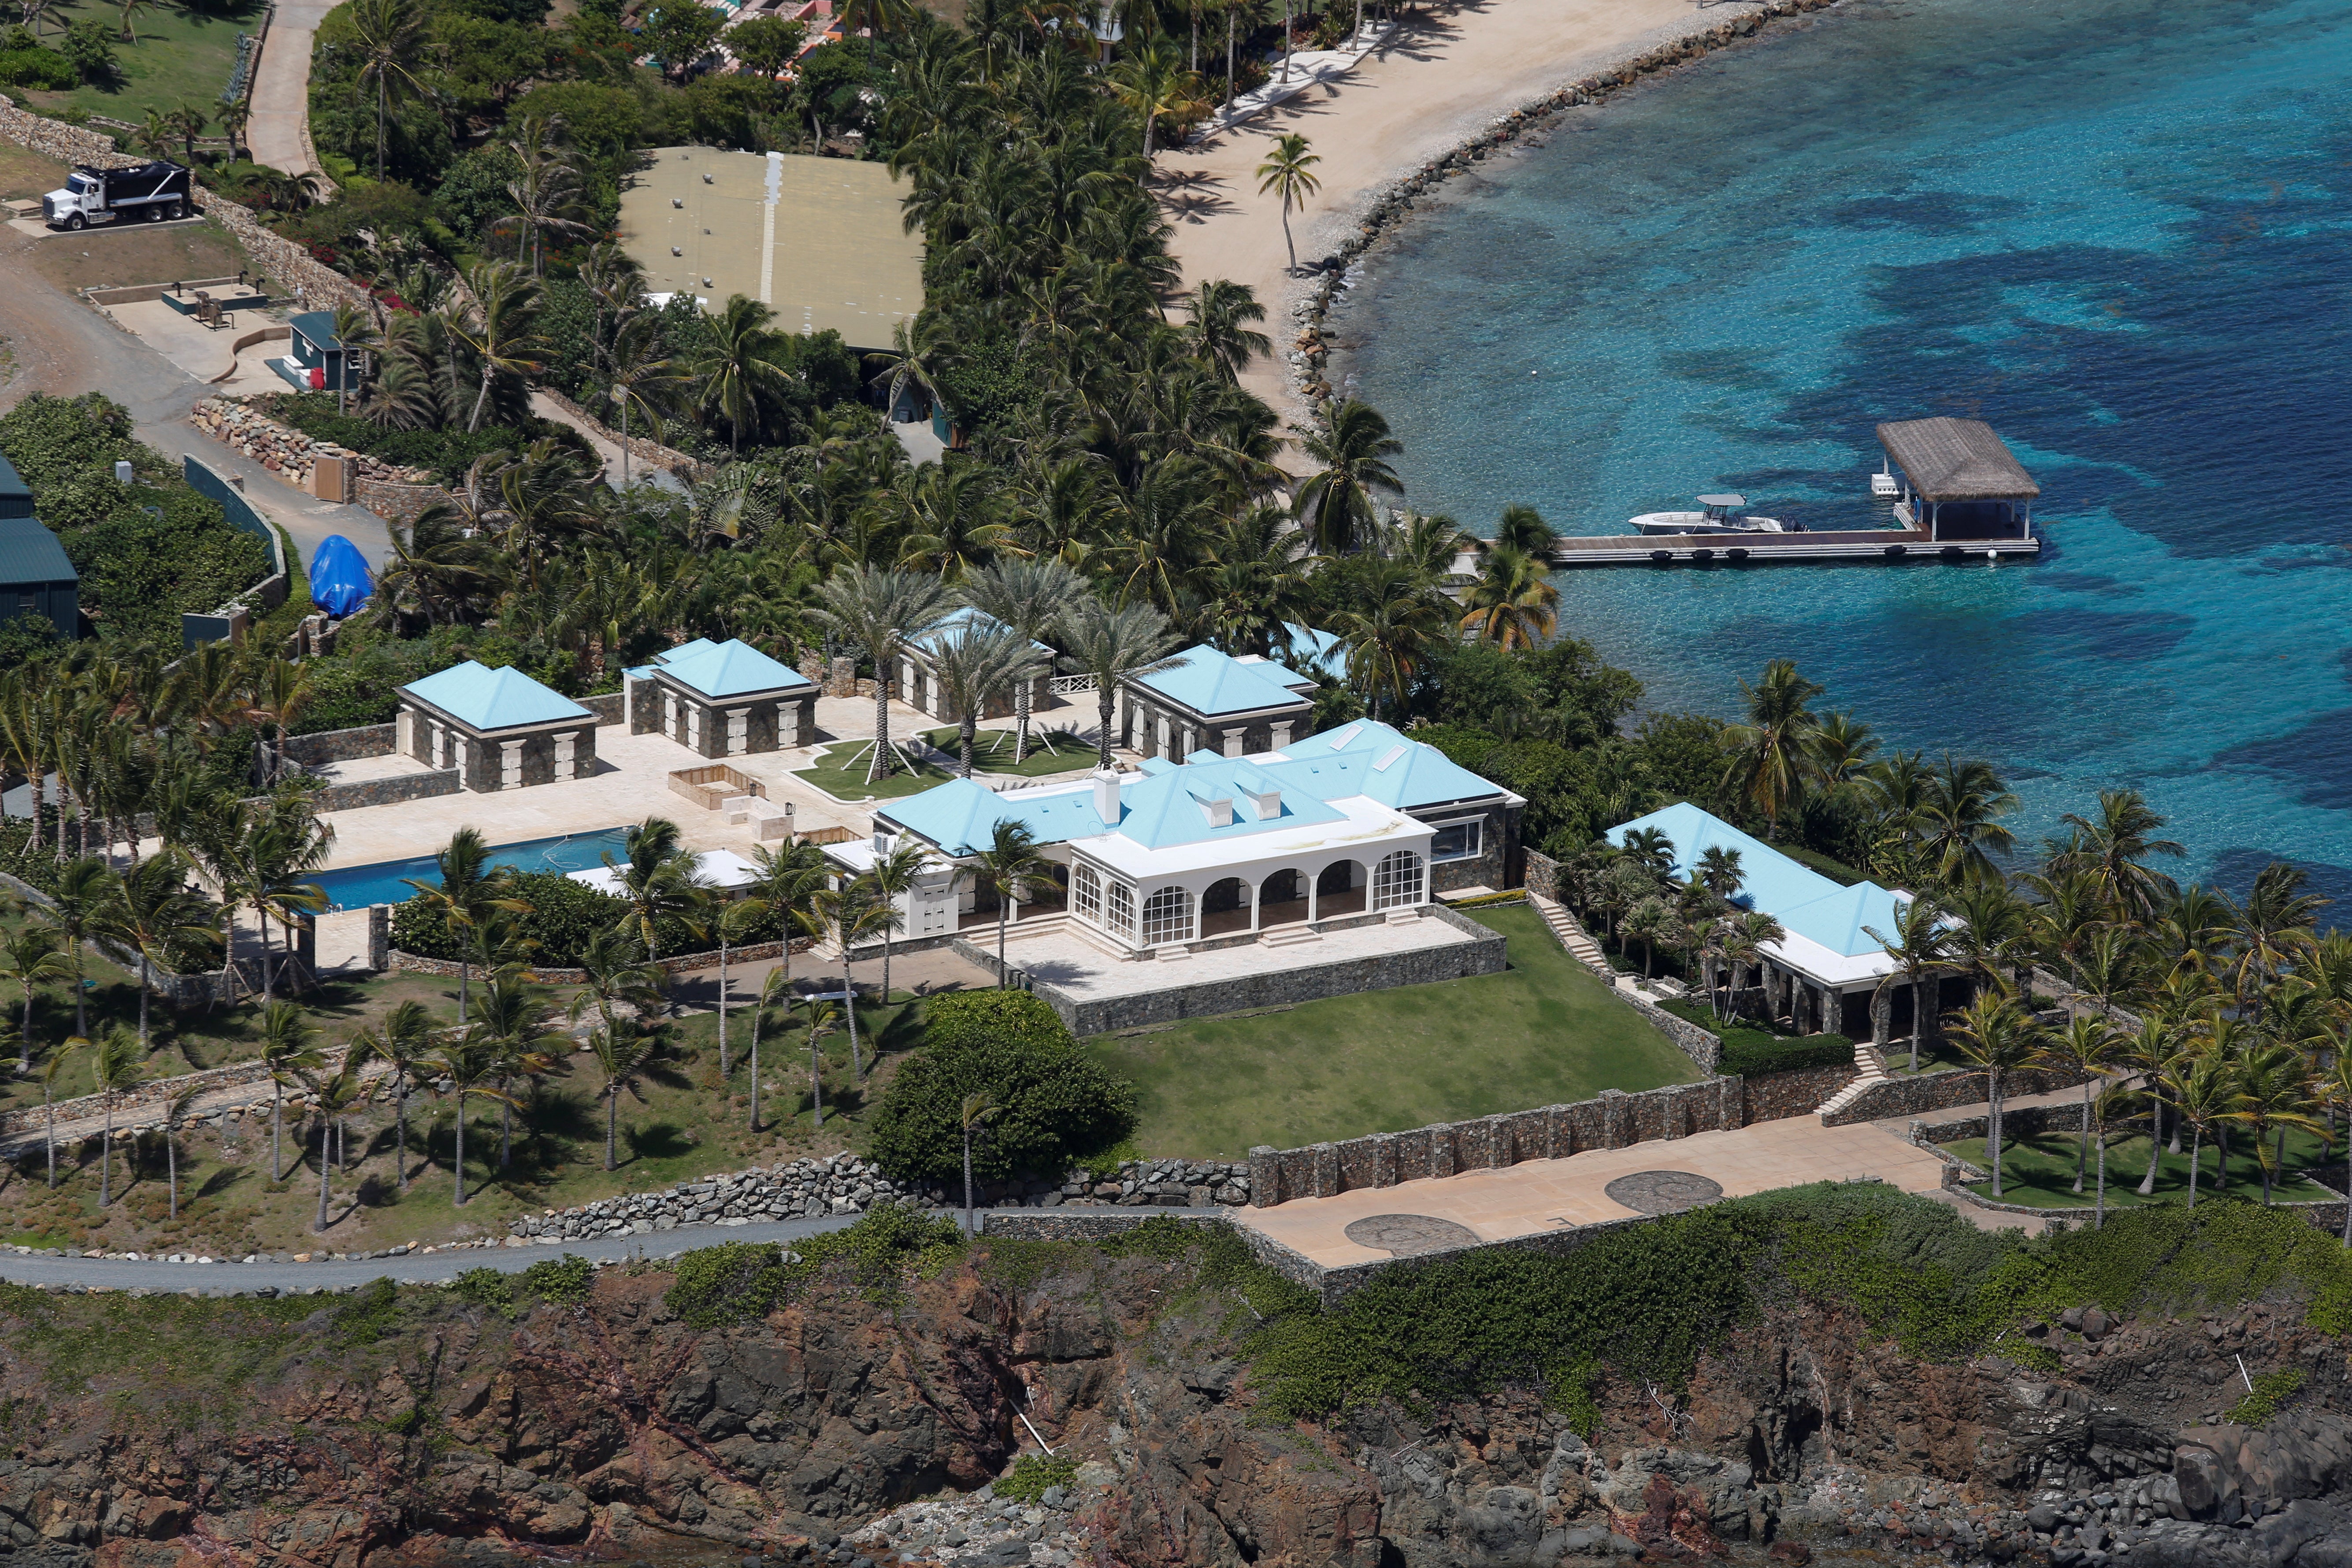 Little St. James Island, one of two Caribbean islands owned by Jeffrey Epstein